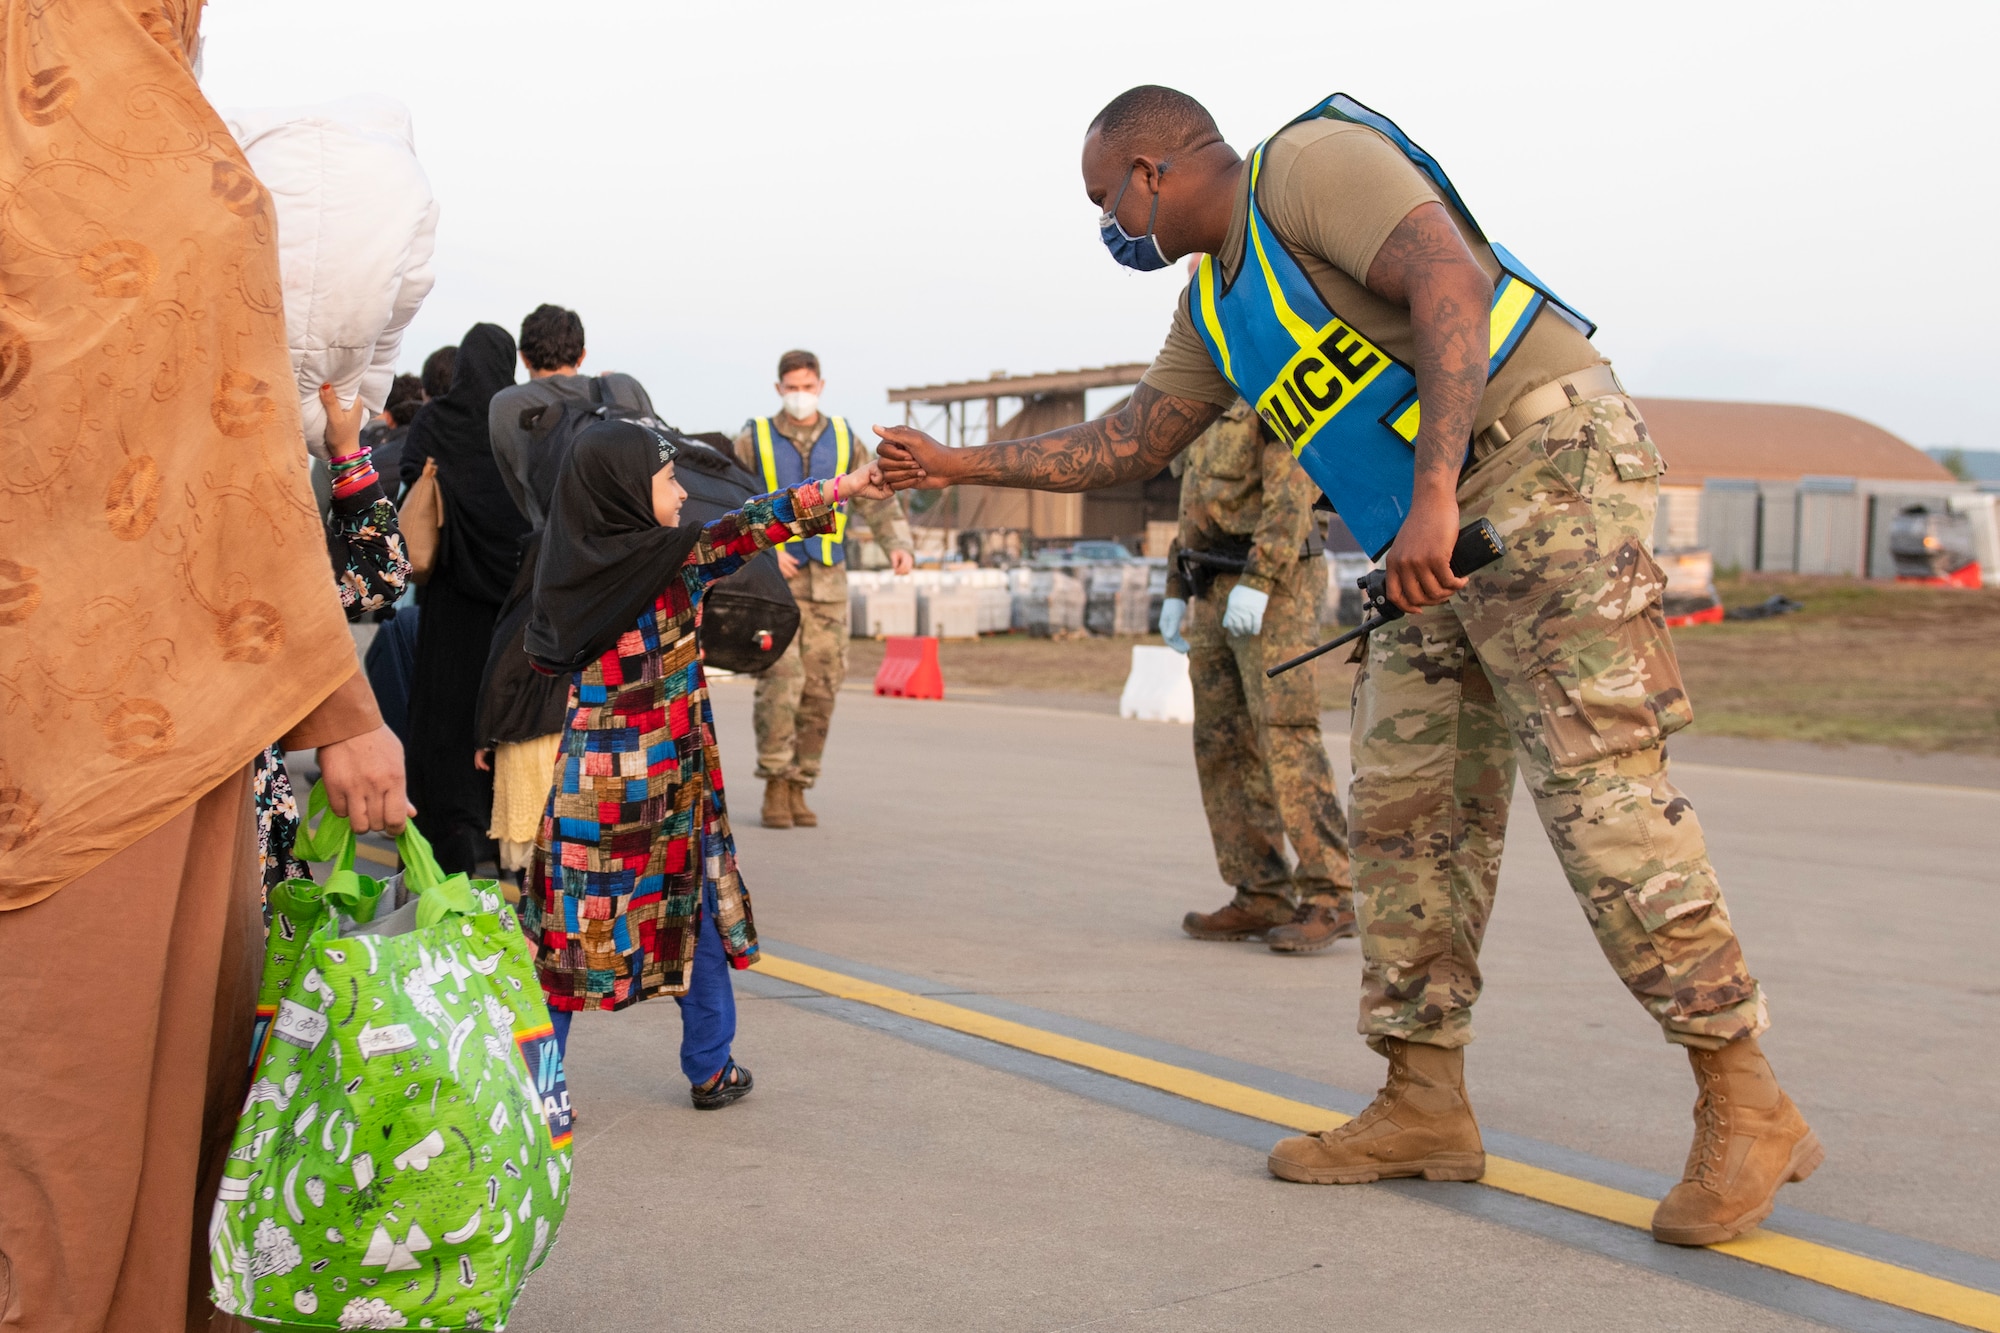 U.S. Air Force Tech. Sgt. Raymond Duesbury, right, 423rd Security Forces Squadron antiterrorism officer assigned to Royal Air Force Alconbury, England, greets a child during Operation Allies Refuge at Ramstein Air Base, Germany, Aug. 31, 2021. Operation Allies Refuge is providing support to evacuees from Afghanistan in the form of food, medical services, and temporary lodging while they await transportation to other transient locations. Ramstein Air Base transformed into U.S. European Command’s primary evacuation hub, supporting one of the largest, most complex humanitarian airlift operations in history. (U.S. Air Force photo by Senior Airman Jennifer Zima)